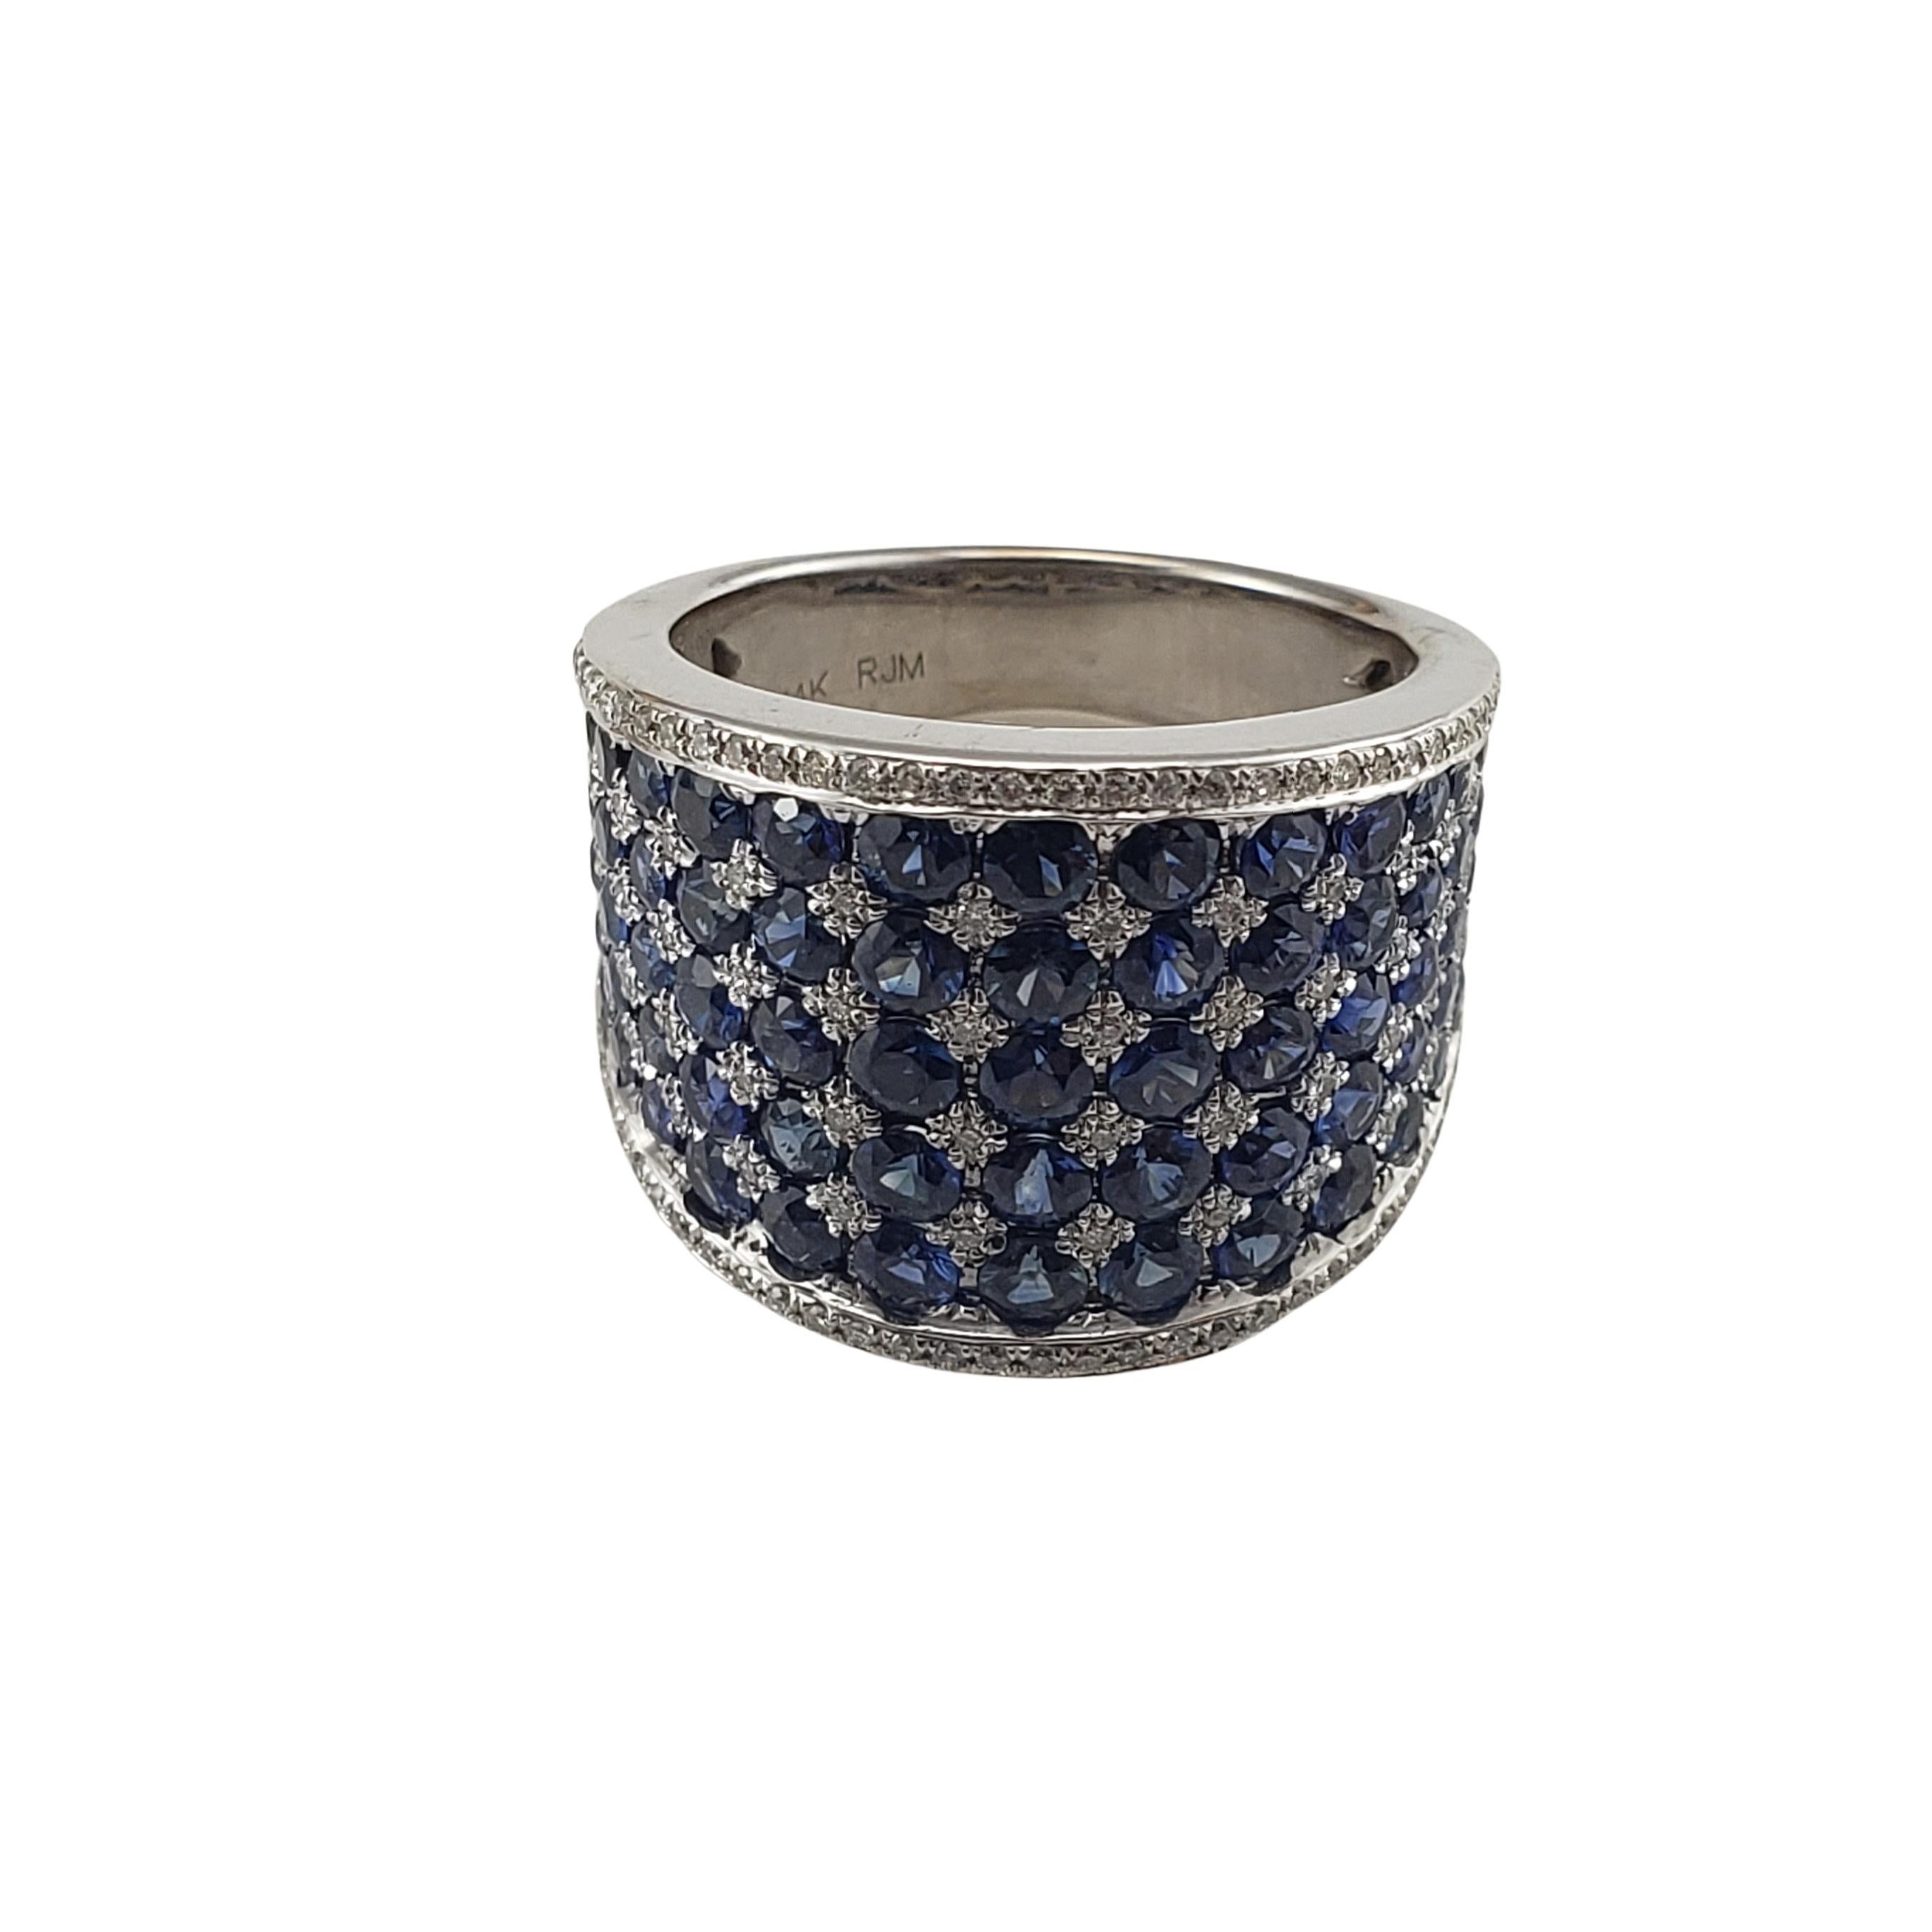 14 Karat White Gold Sapphire and Diamond Band Ring Size 7 GAI Certified-

This stunning cigar band ring features 62 round brilliant cut diamonds and 65 blue sapphires set in classic 14K white gold.  
Width:  16 mm.  Shank:  5 mm.

Total diamond